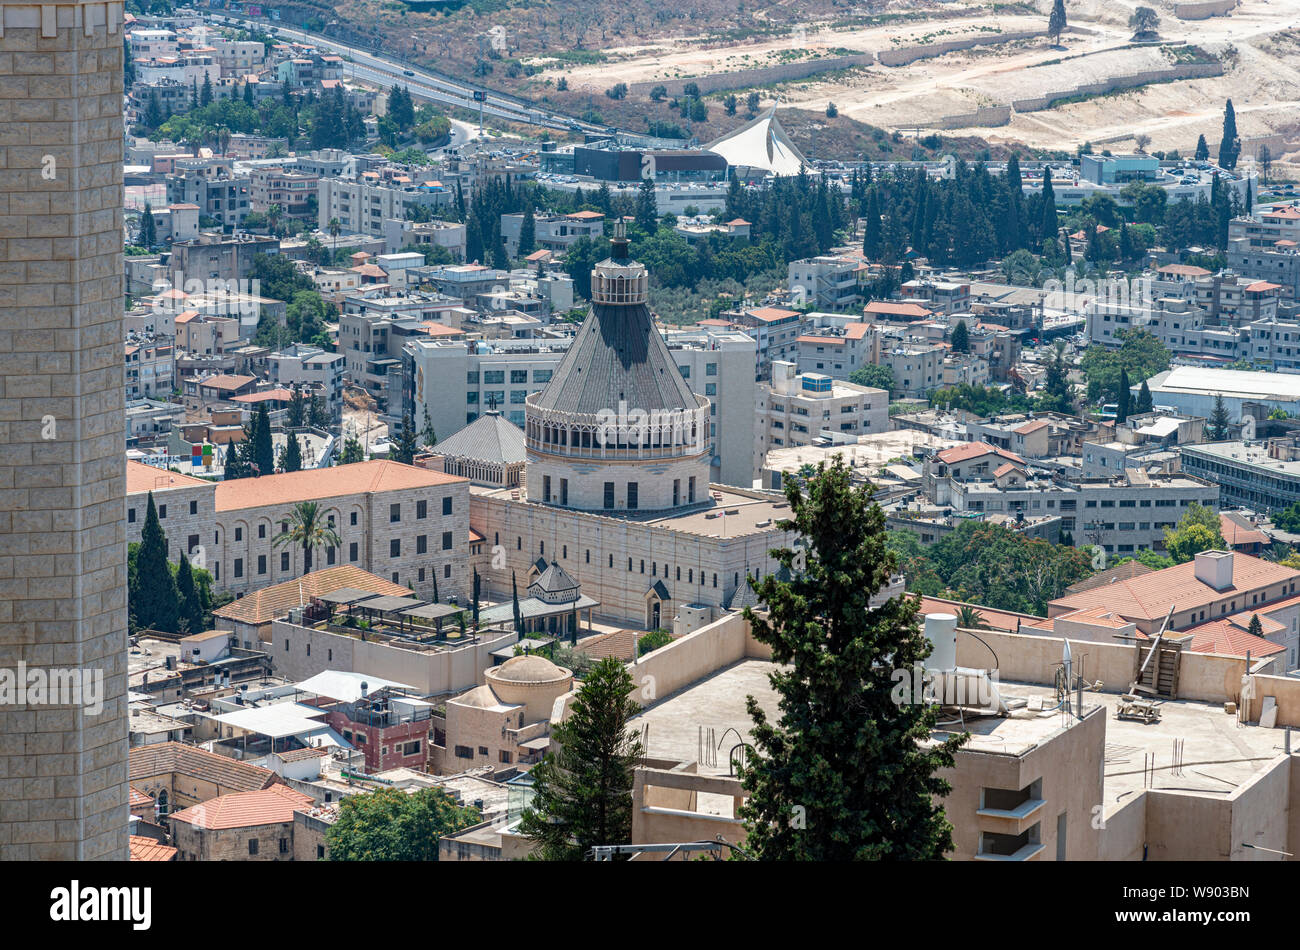 Top view of the Basilica of the Annunciation, Nazareth Stock Photo